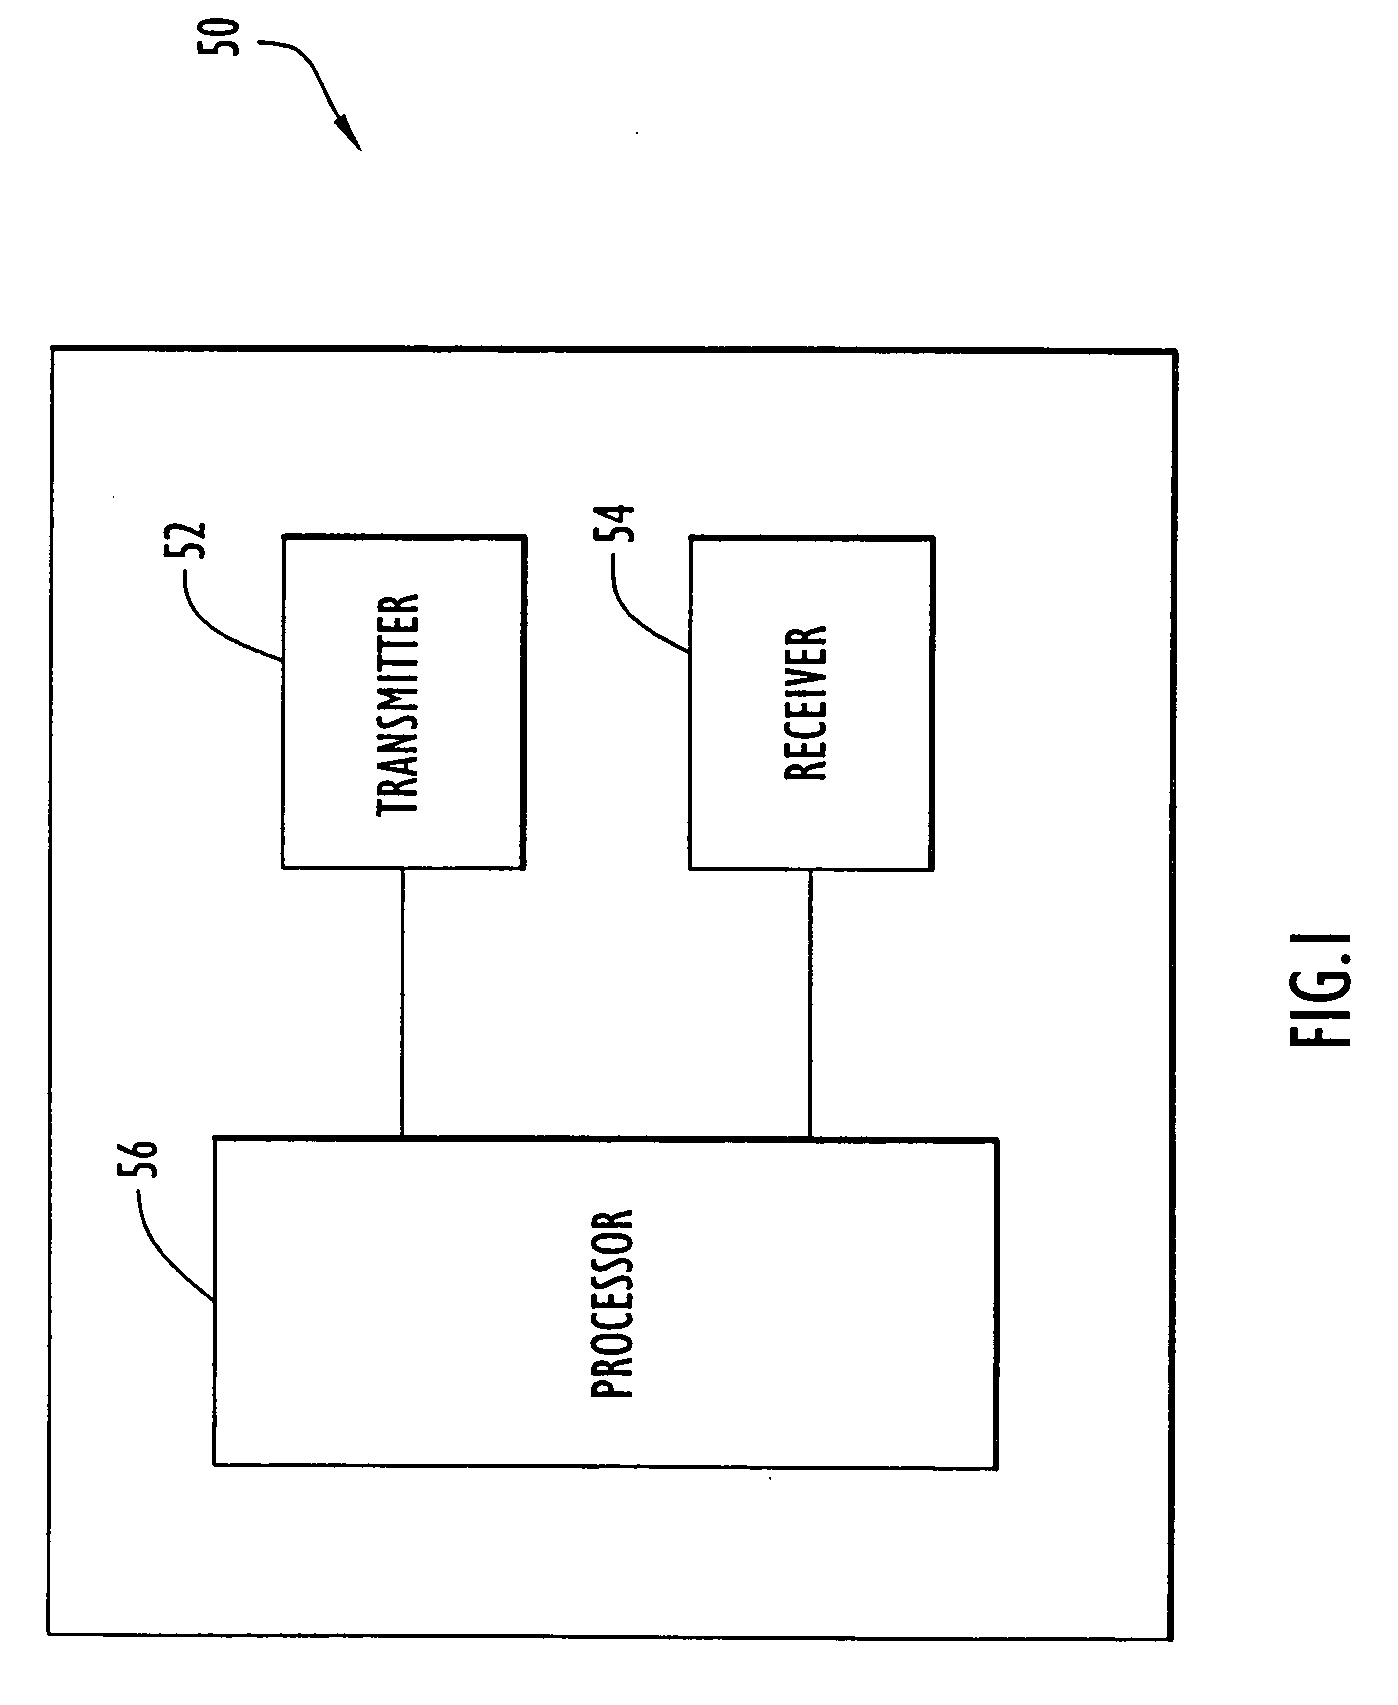 Method and apparatus for target discrimination within return signals